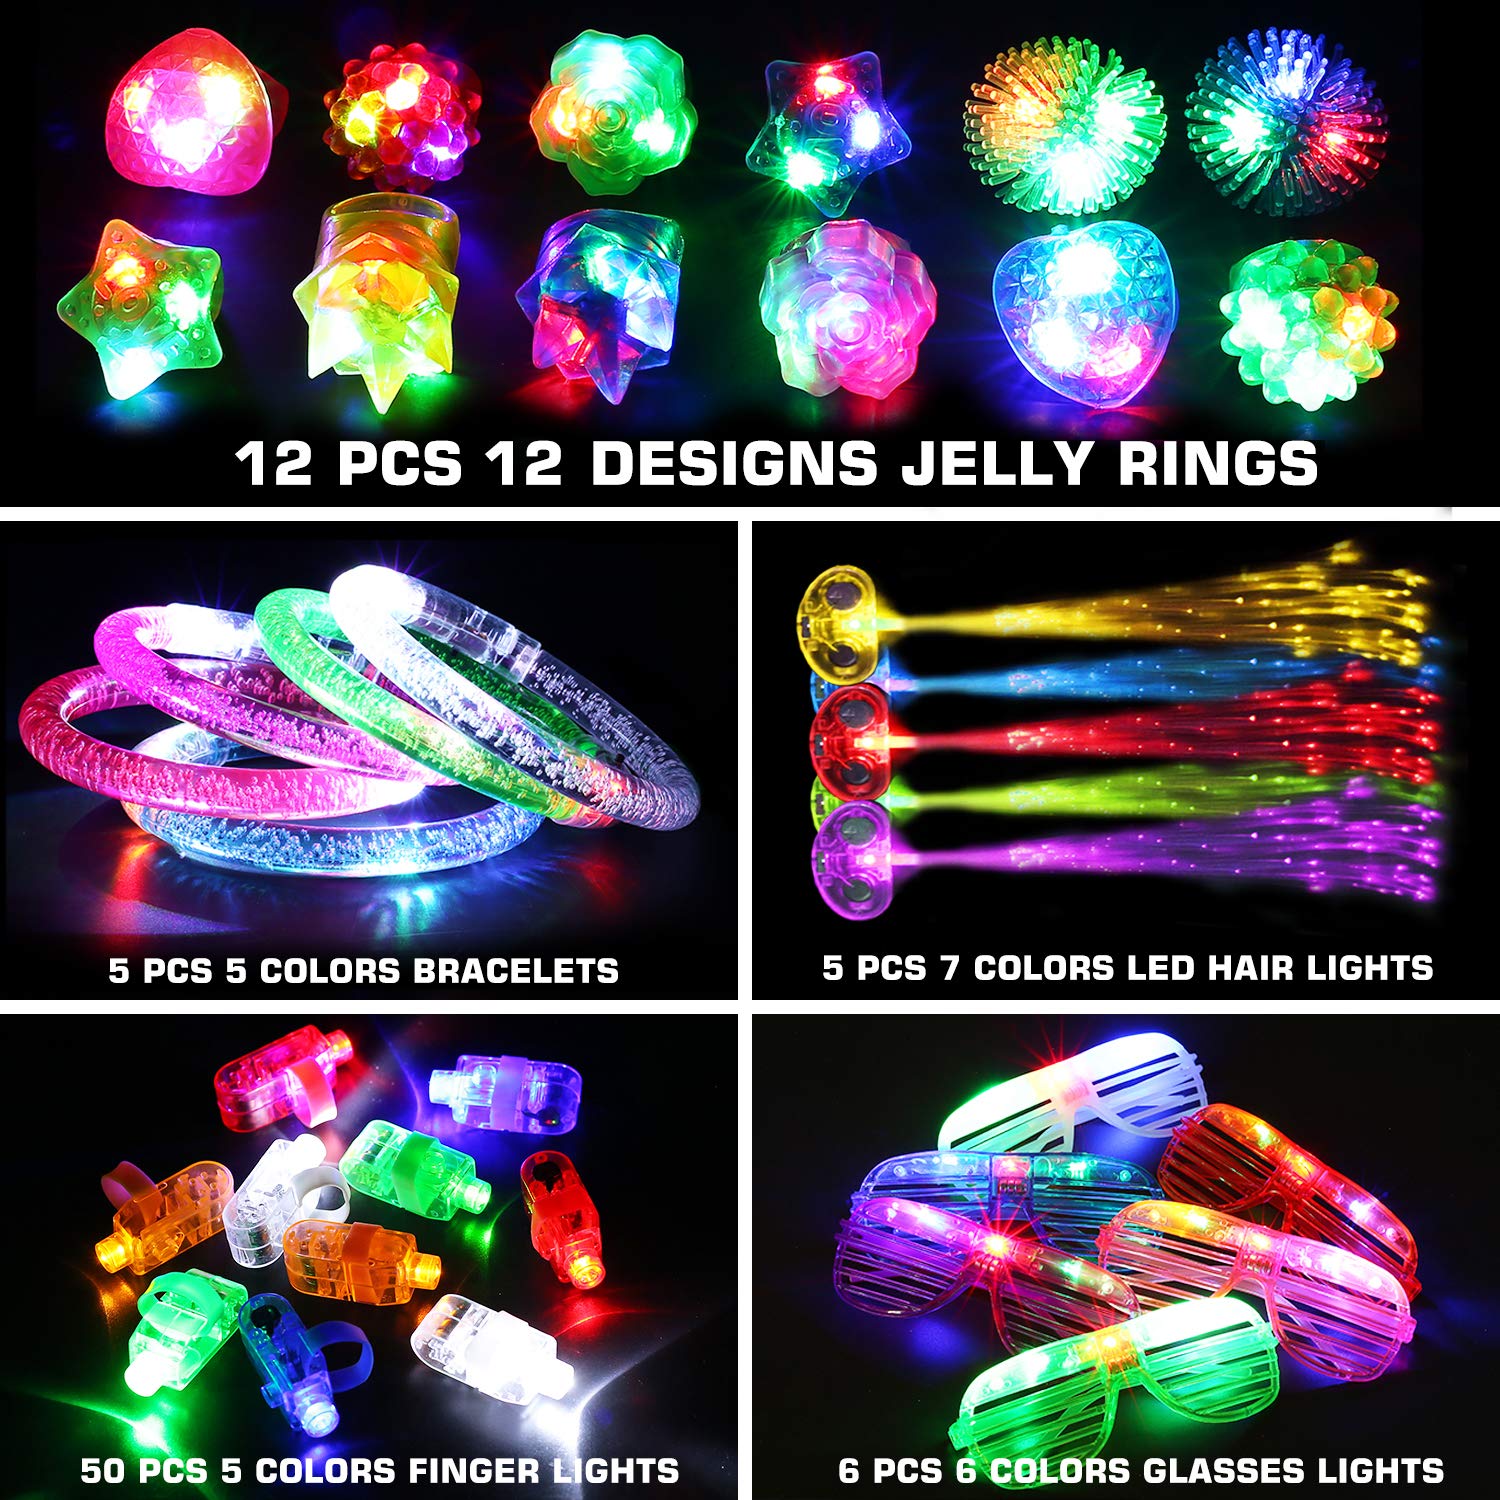 78PCs LED Light Up Toy Party Favors Glow In The Dark,Party Supplies Bulk For Adult Kids Birthday Halloween With 50 Finger Light, 12 Jelly Ring, 6 Flashing Glasses, 5 Bracelet, 5 Fiber Optic Hair Light